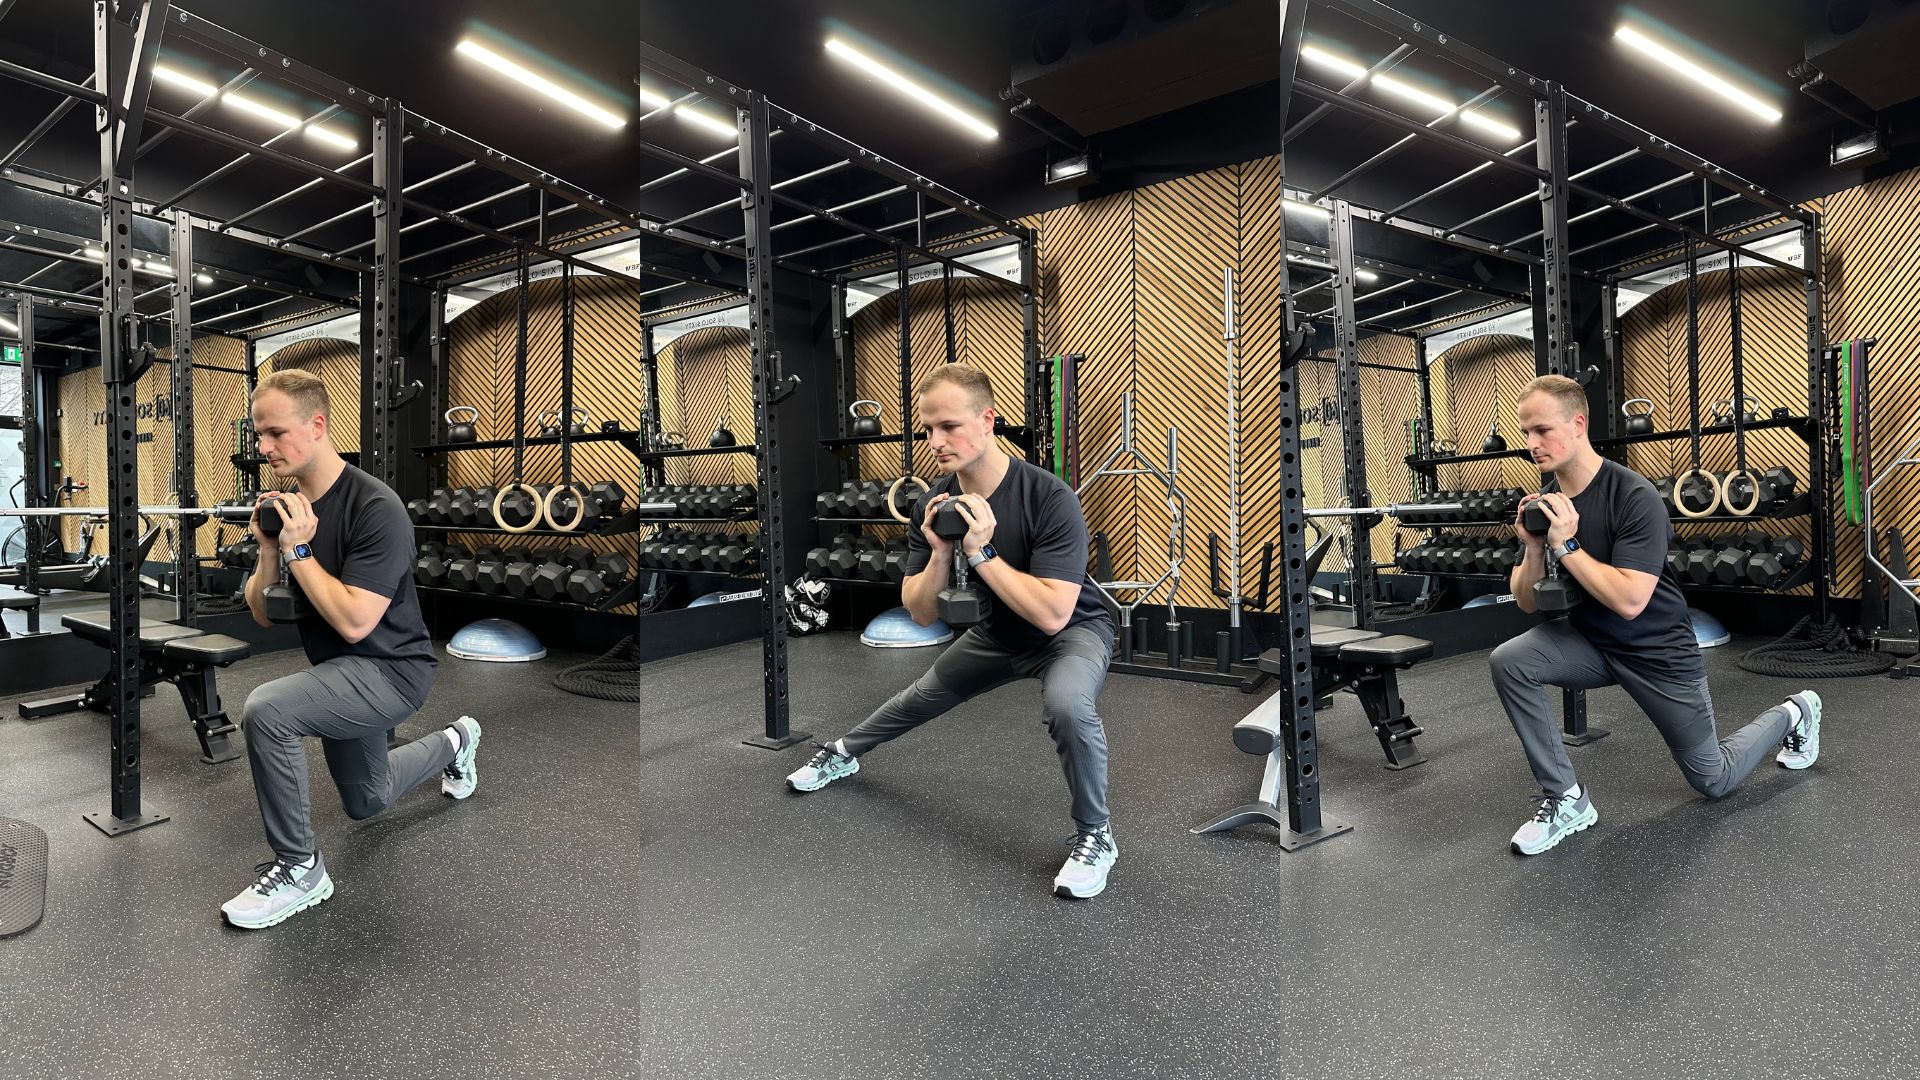 Ollie Thompson demonstrates three positions of the three-way lunge